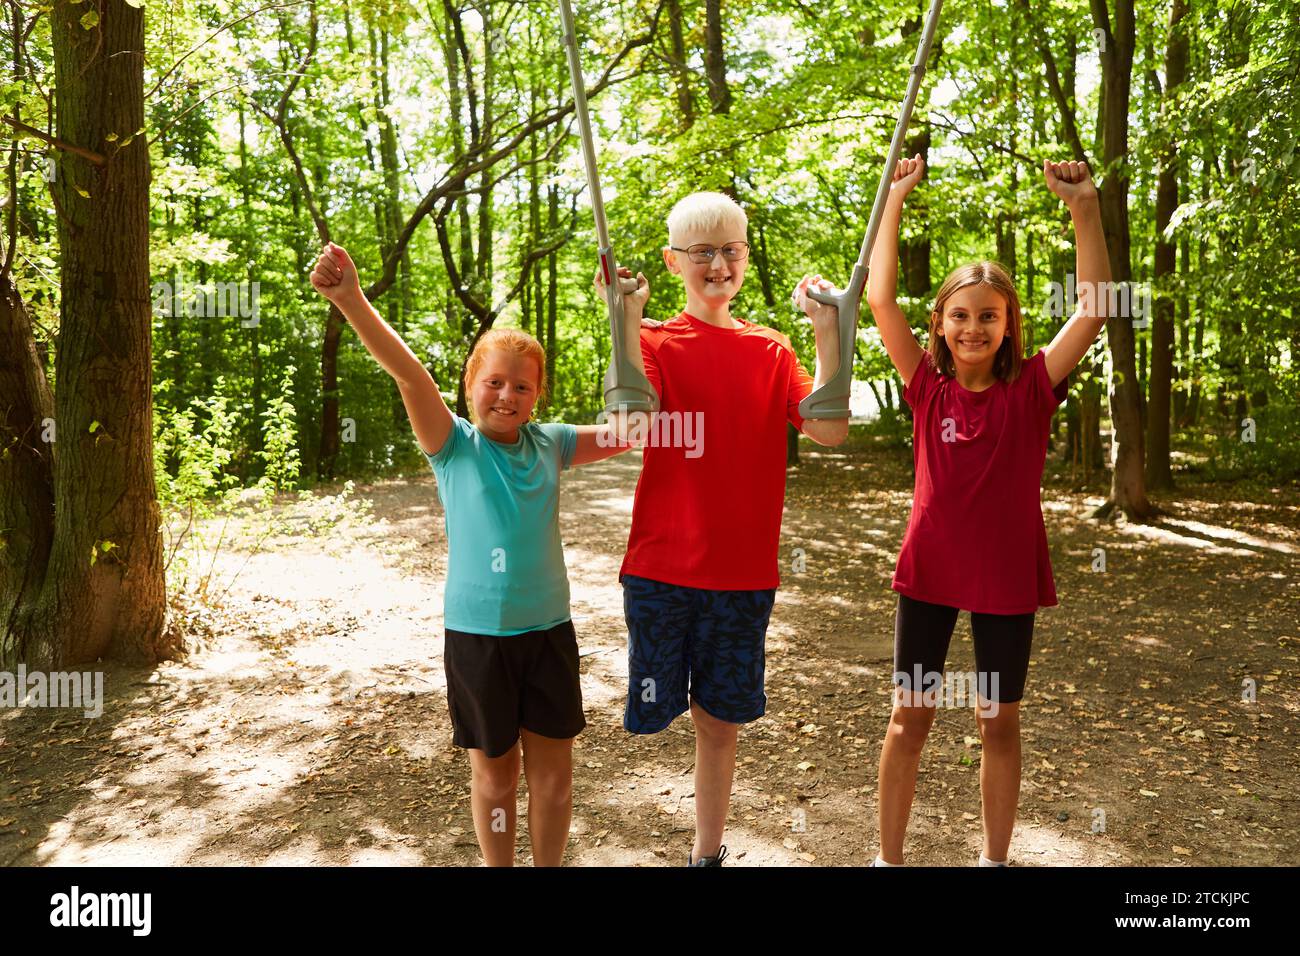 Portrait of cheerful girls standing with boy holding crutches while standing at forest Stock Photo